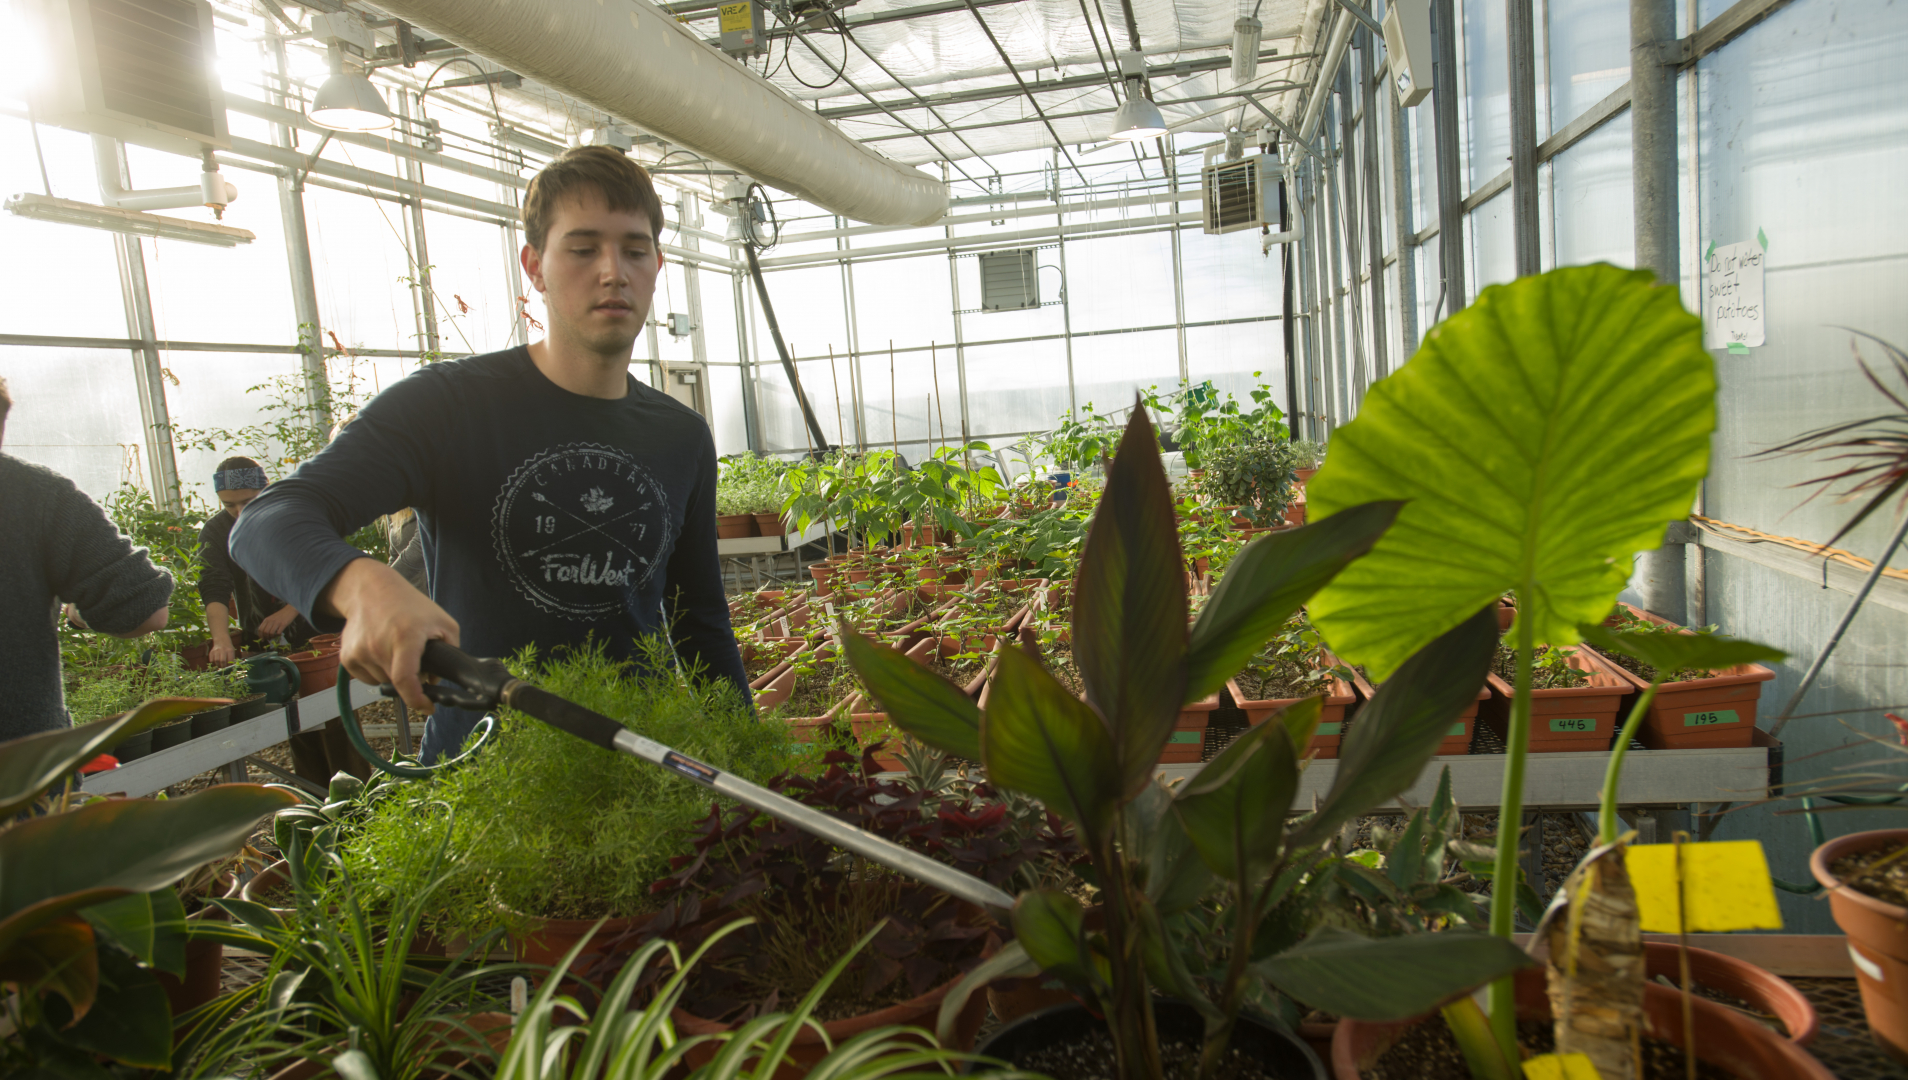 A student stands in a greenhouse in the left of the frame. He holds a watering device and waters plants that appear in the foreground.